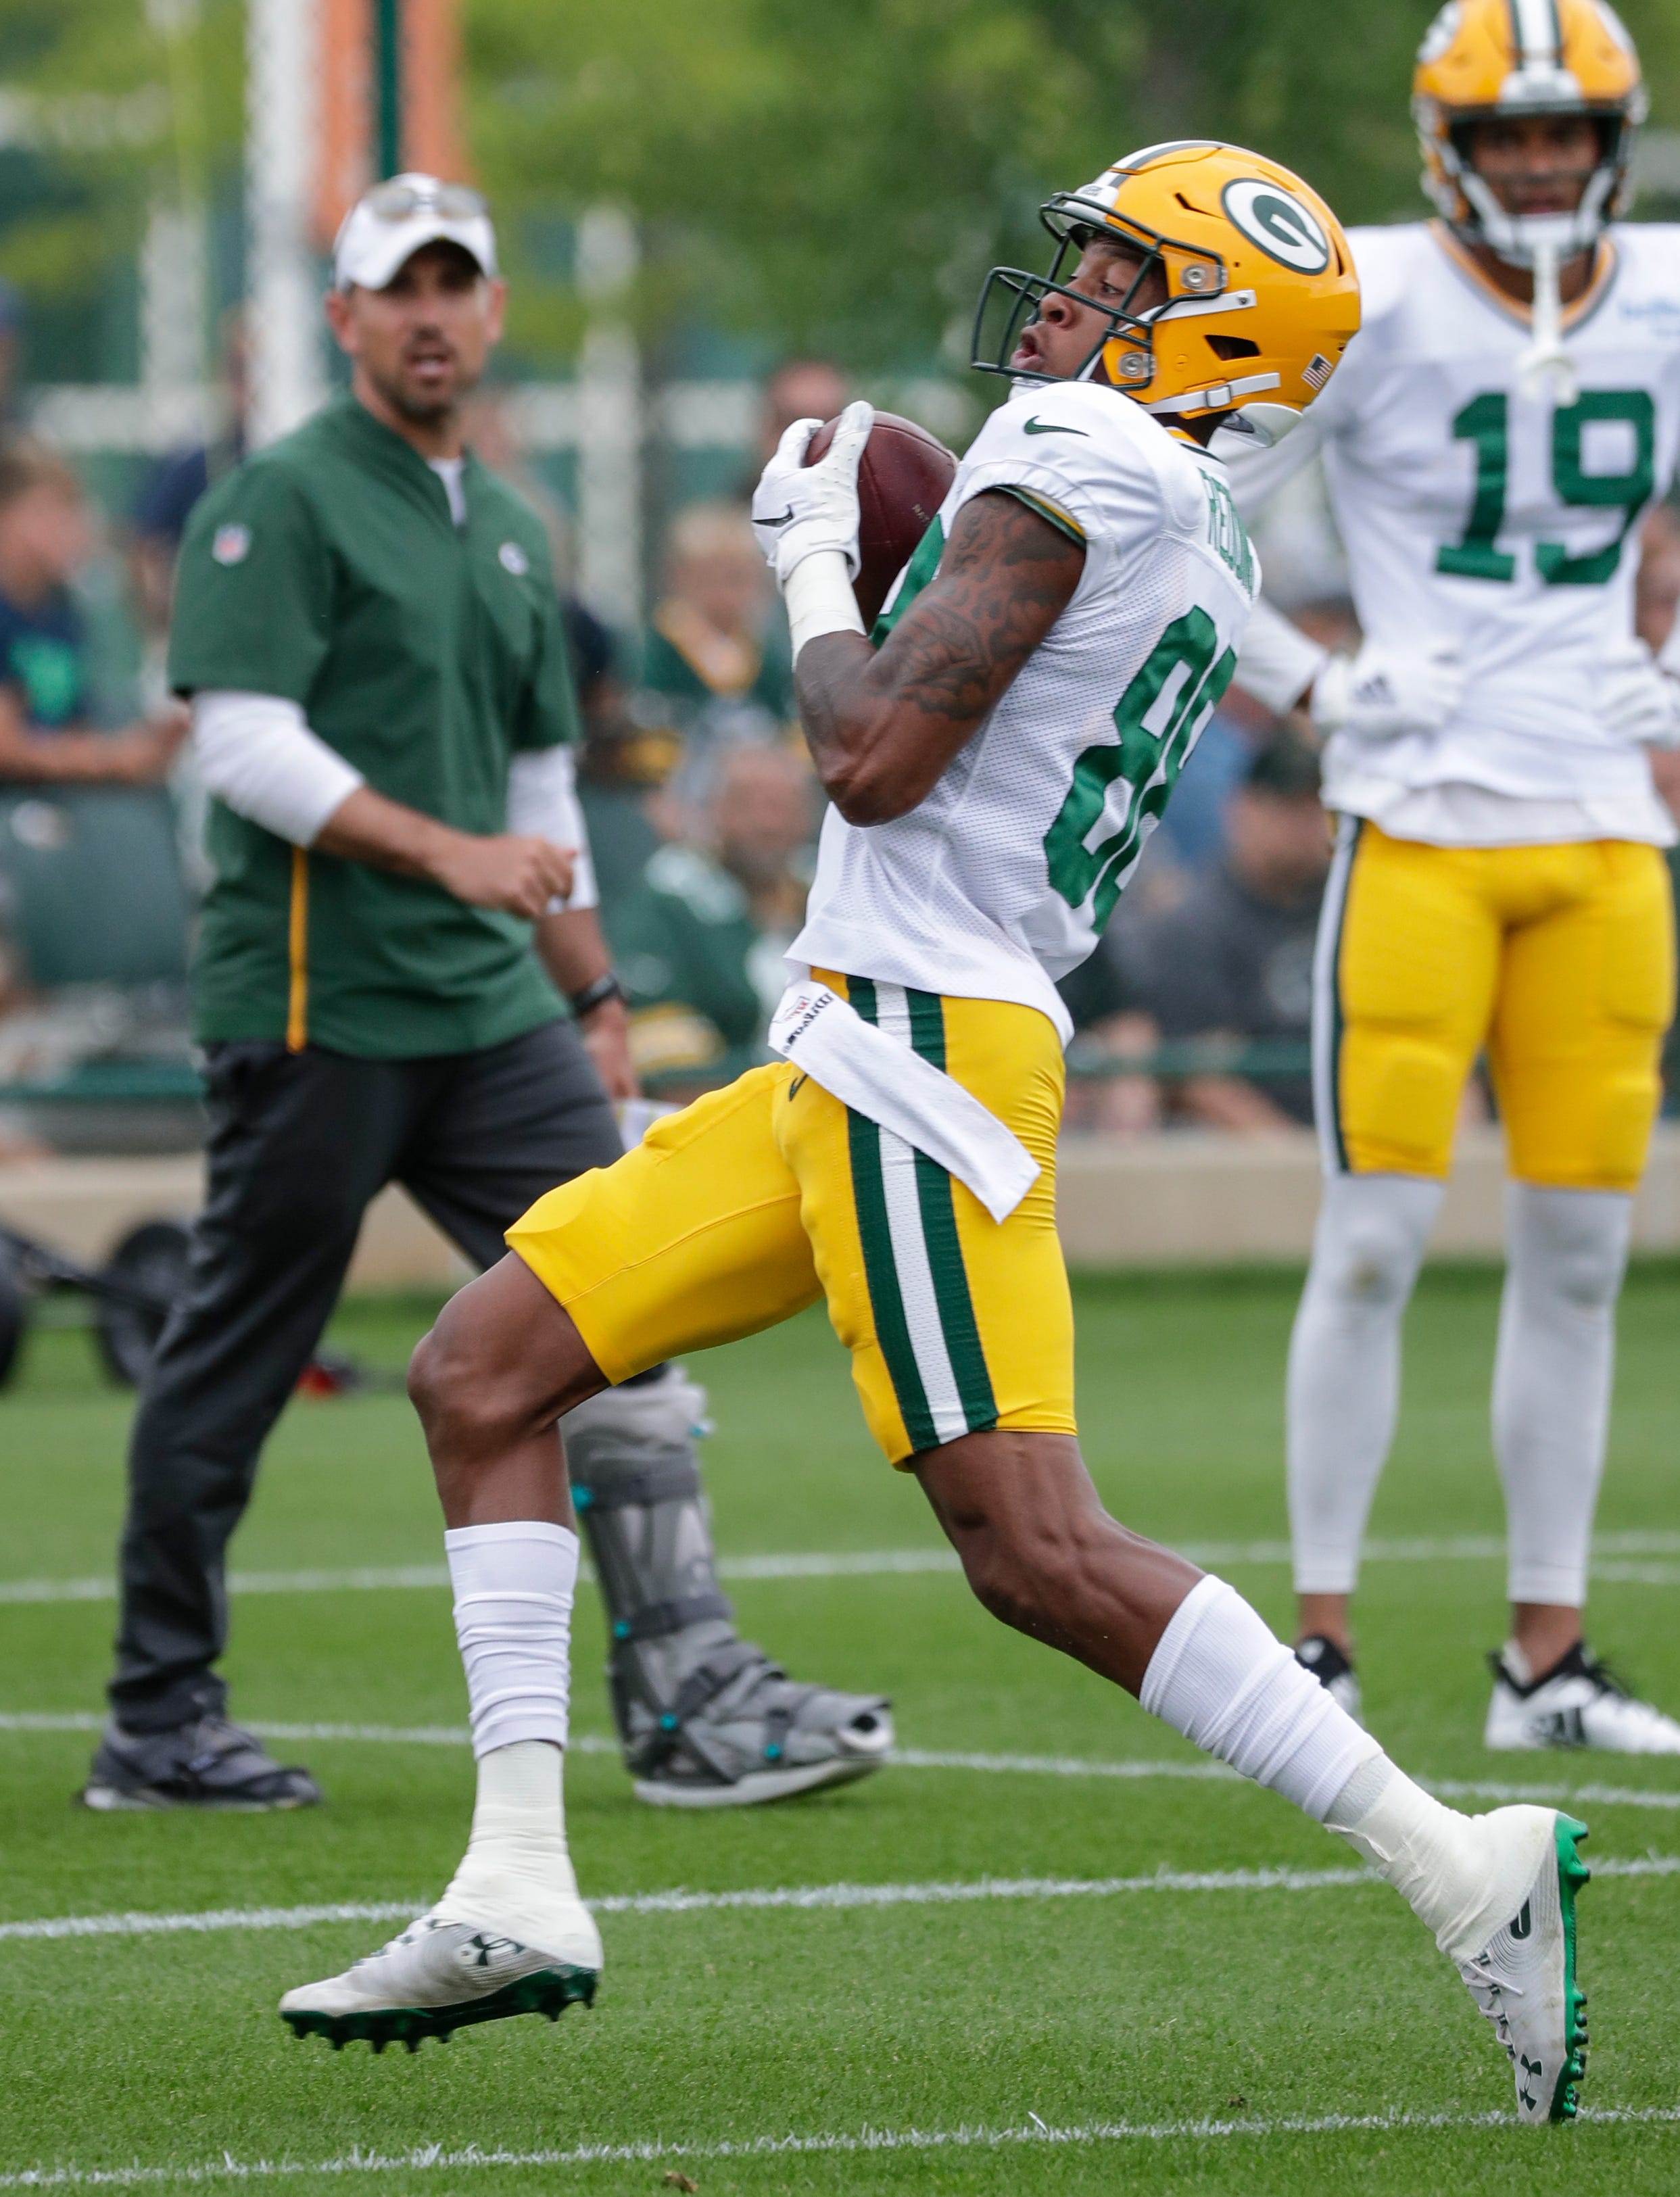 Green Bay Packers' Teo Redding catches a pass during training camp practice Tuesday, August 13, 2019, at Ray Nitschke Field in Ashwaubenon, Wis.